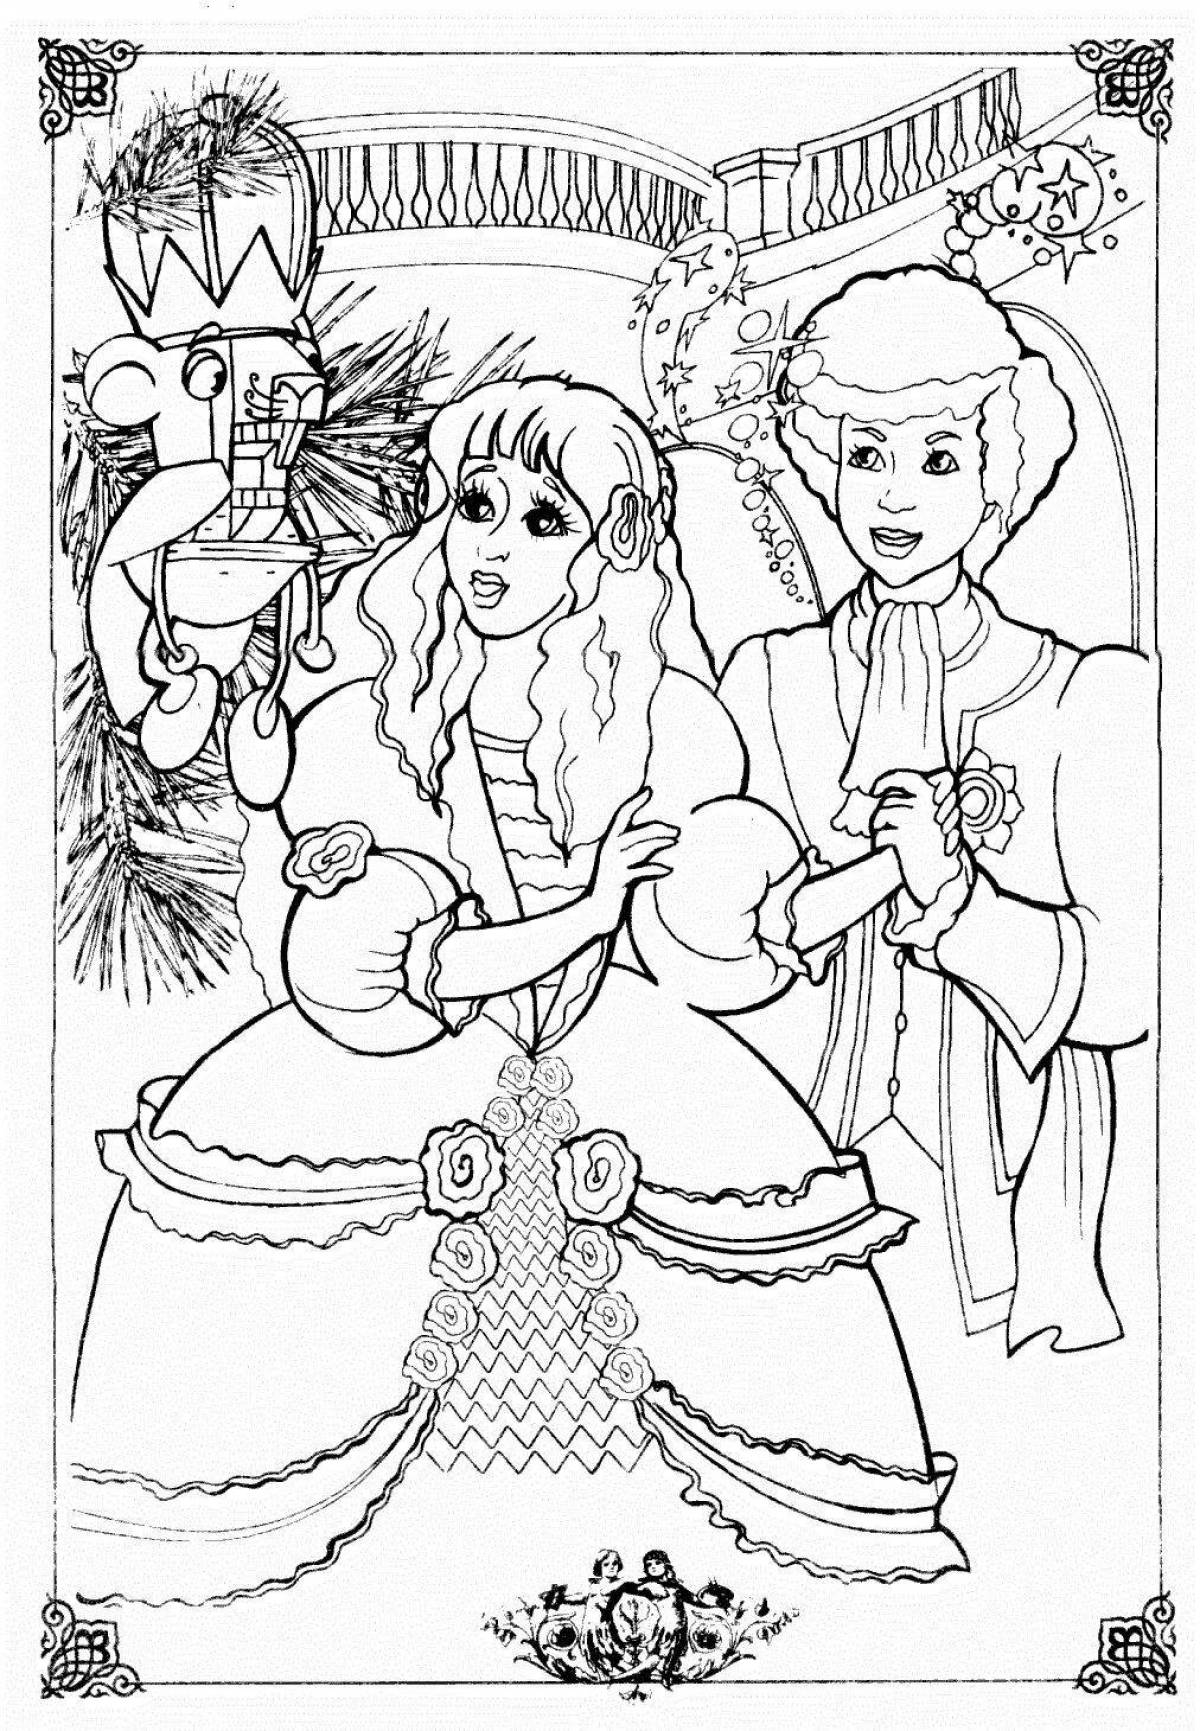 Jolly nutcracker and mouse king coloring book